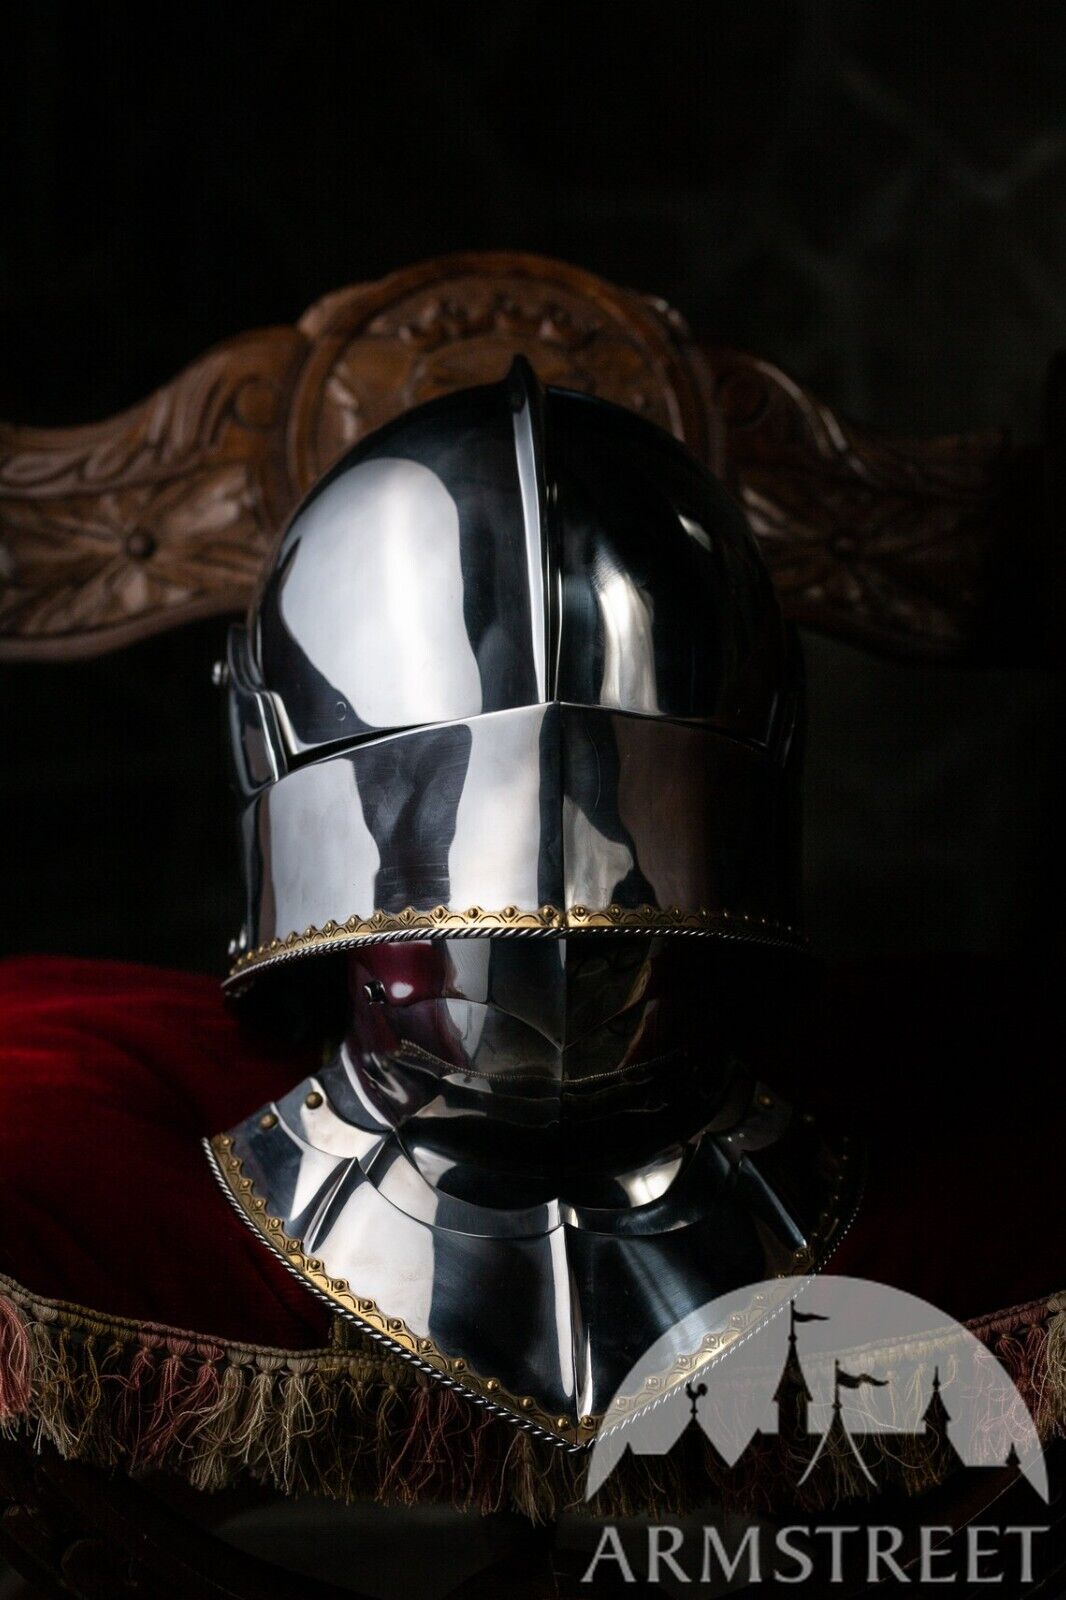 stainless steel SCA sallet and bevor set Handmade neck and head protection